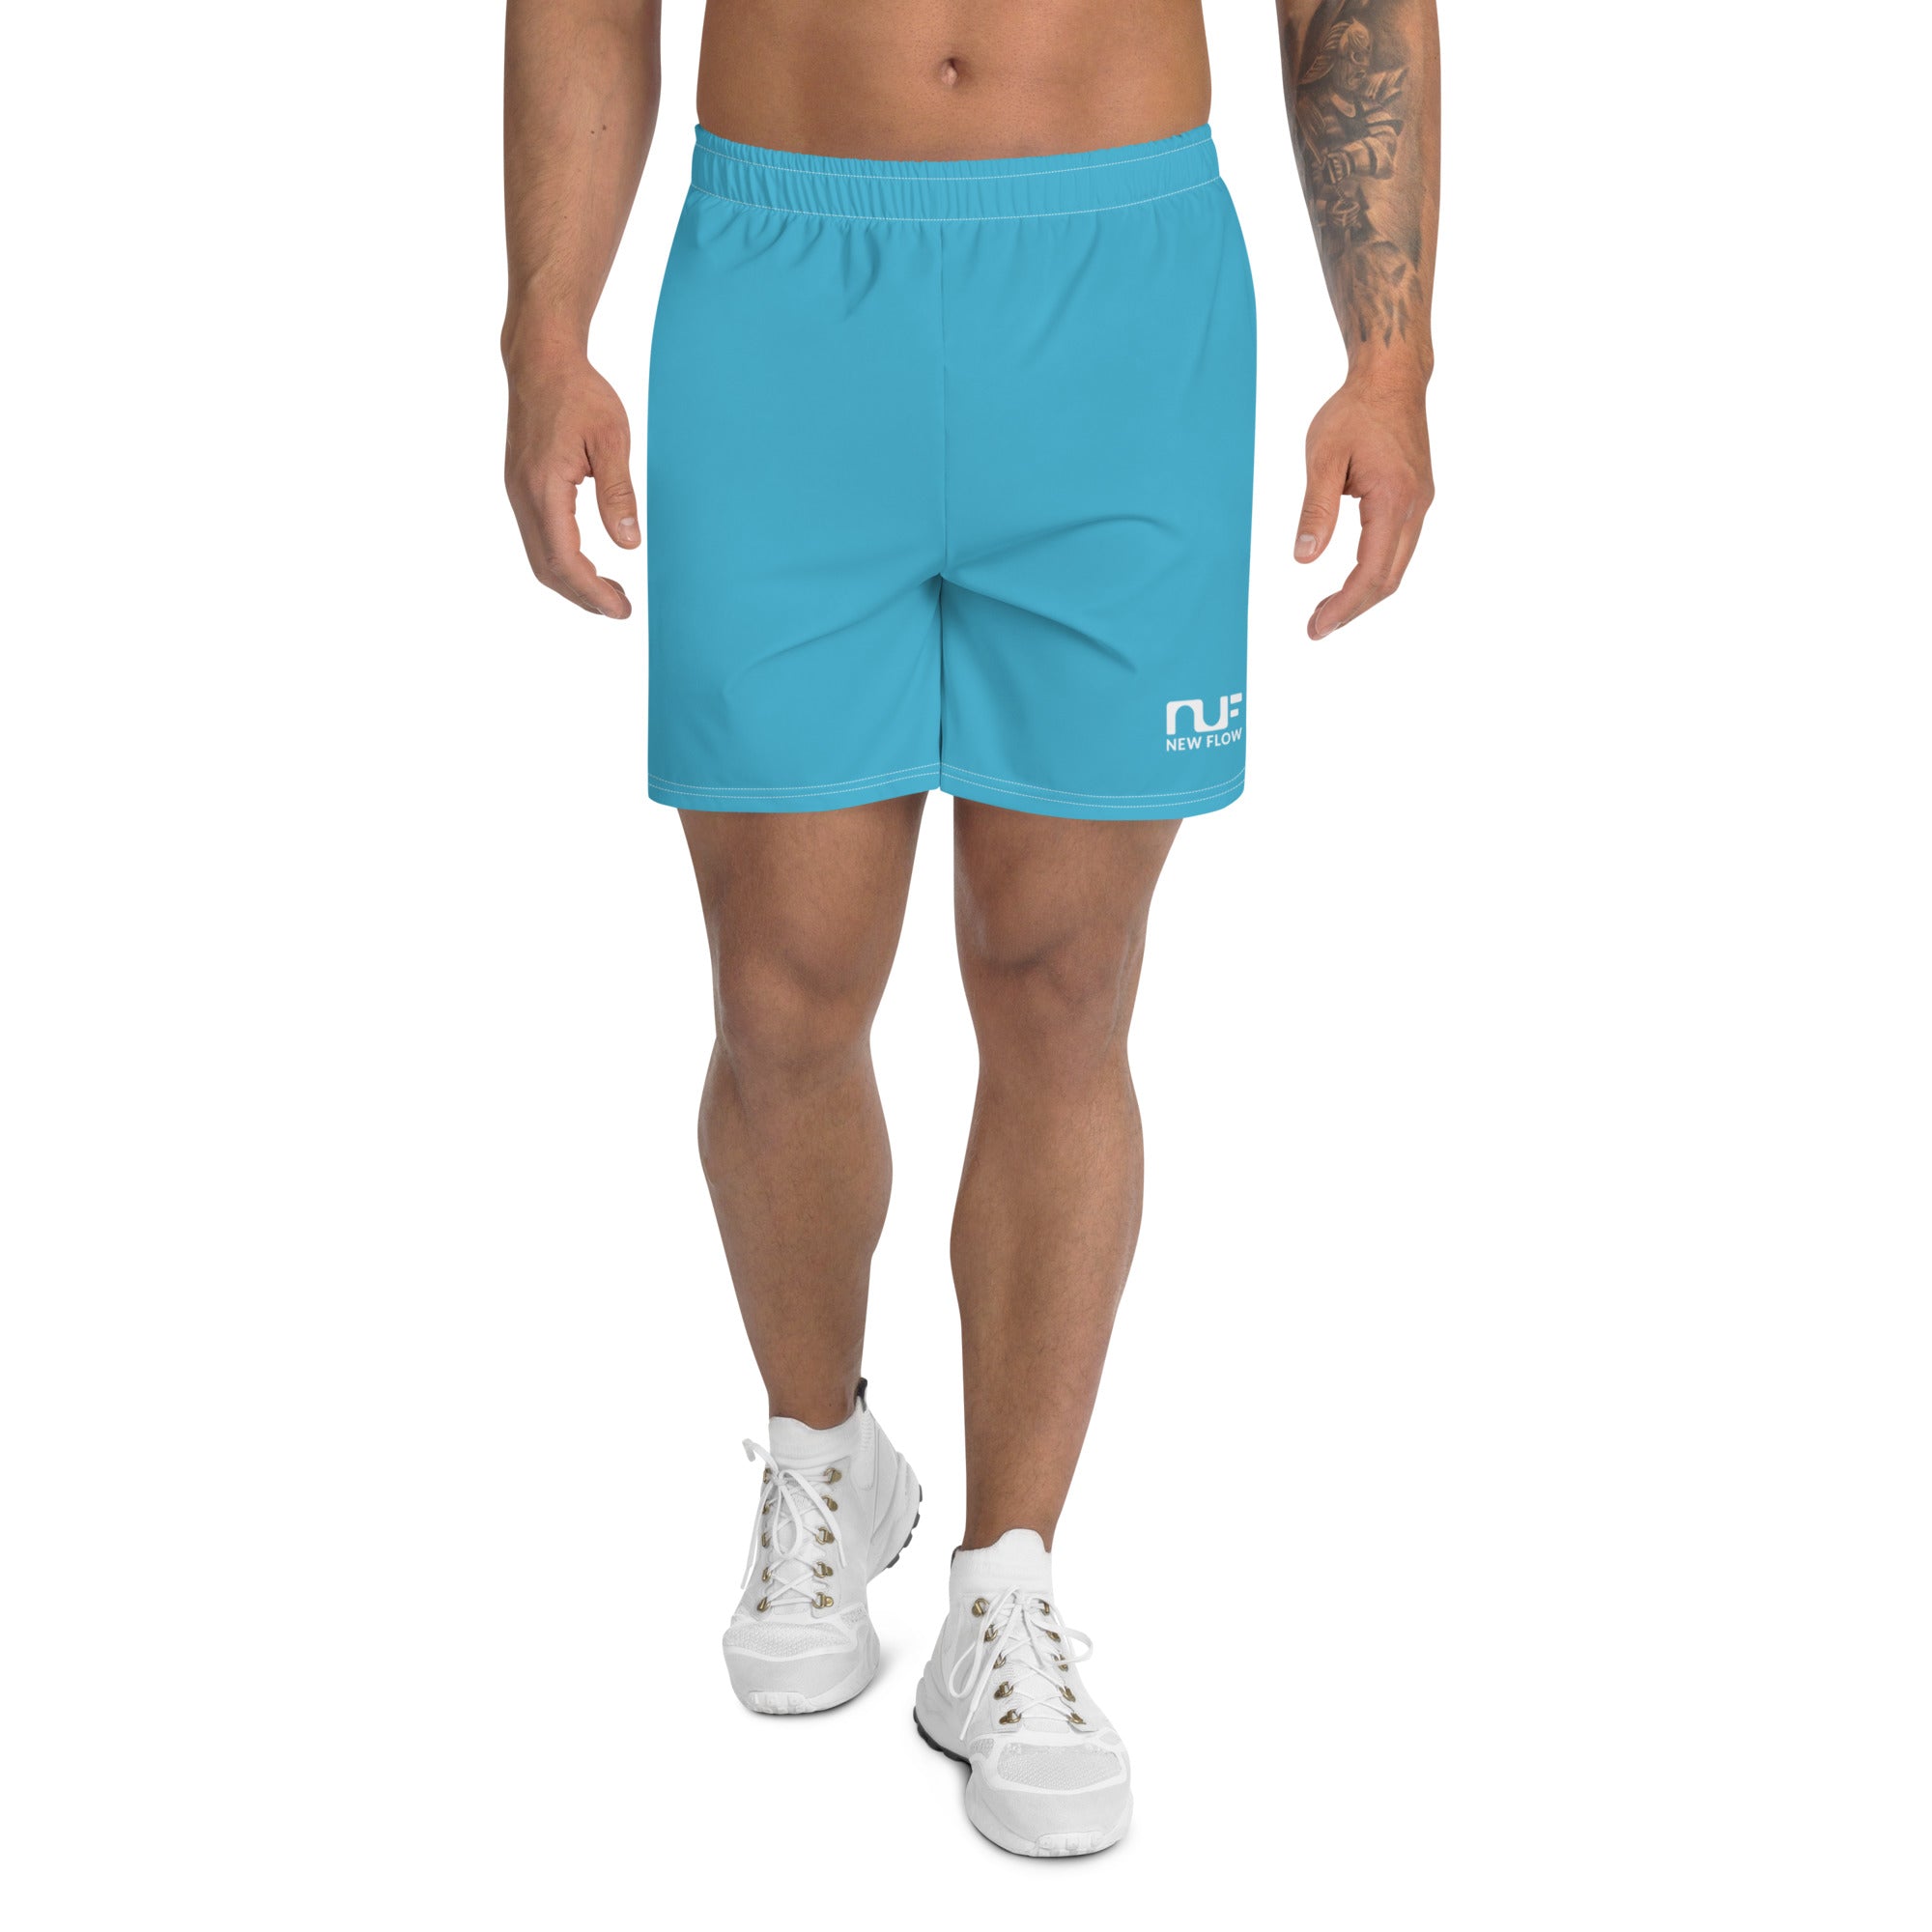 MEN'S RECYCLED ATHLETIC SHORTS – CERULEAN BLUE